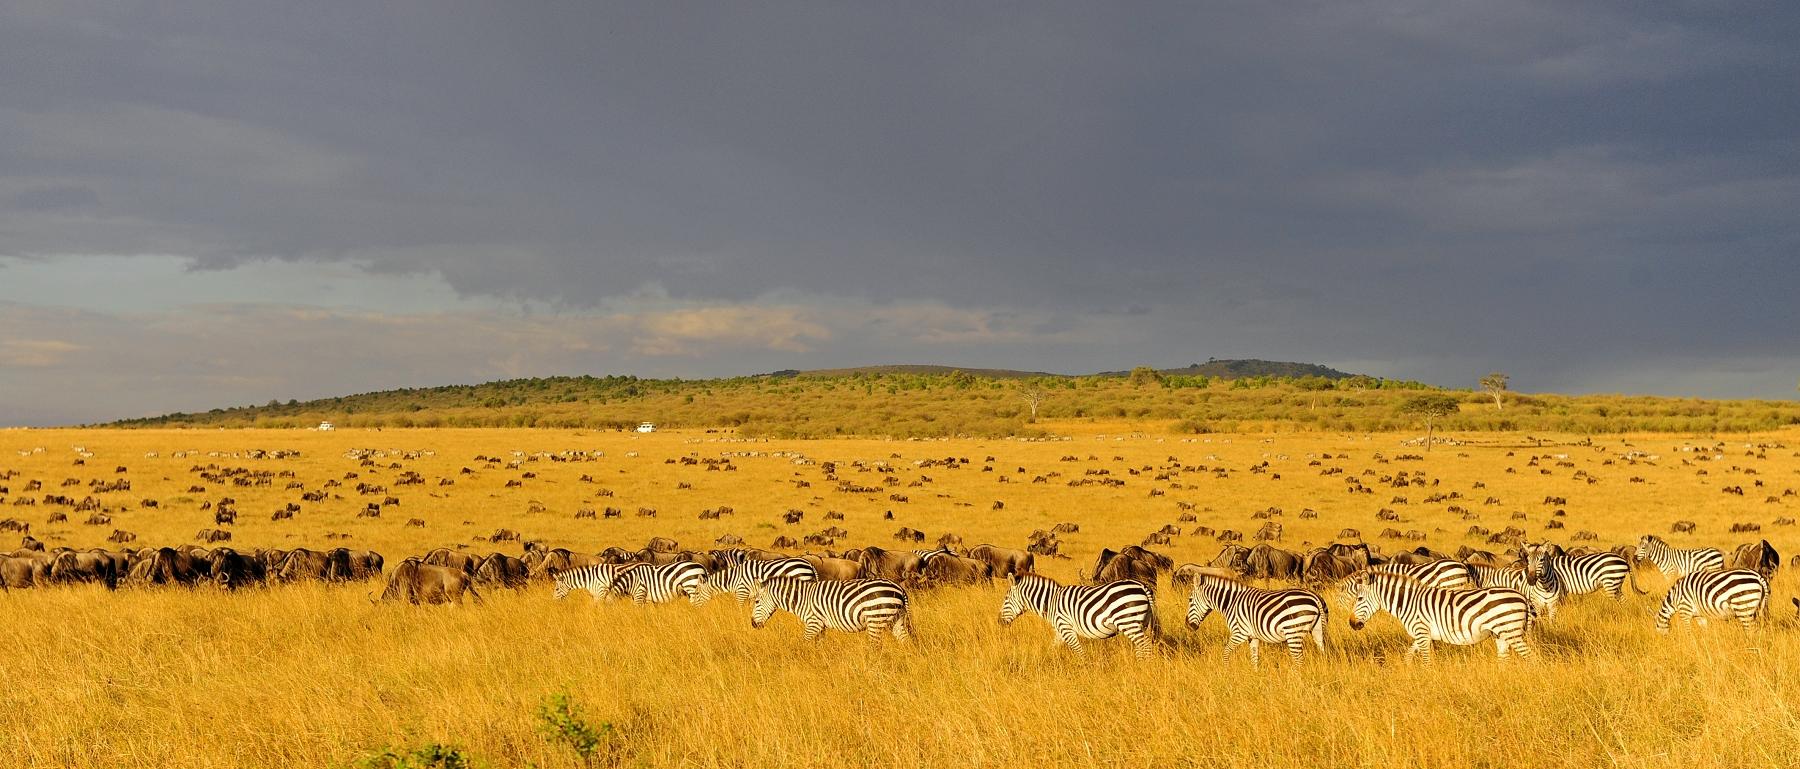 Kenya welcomes Indians to experience a magical holiday